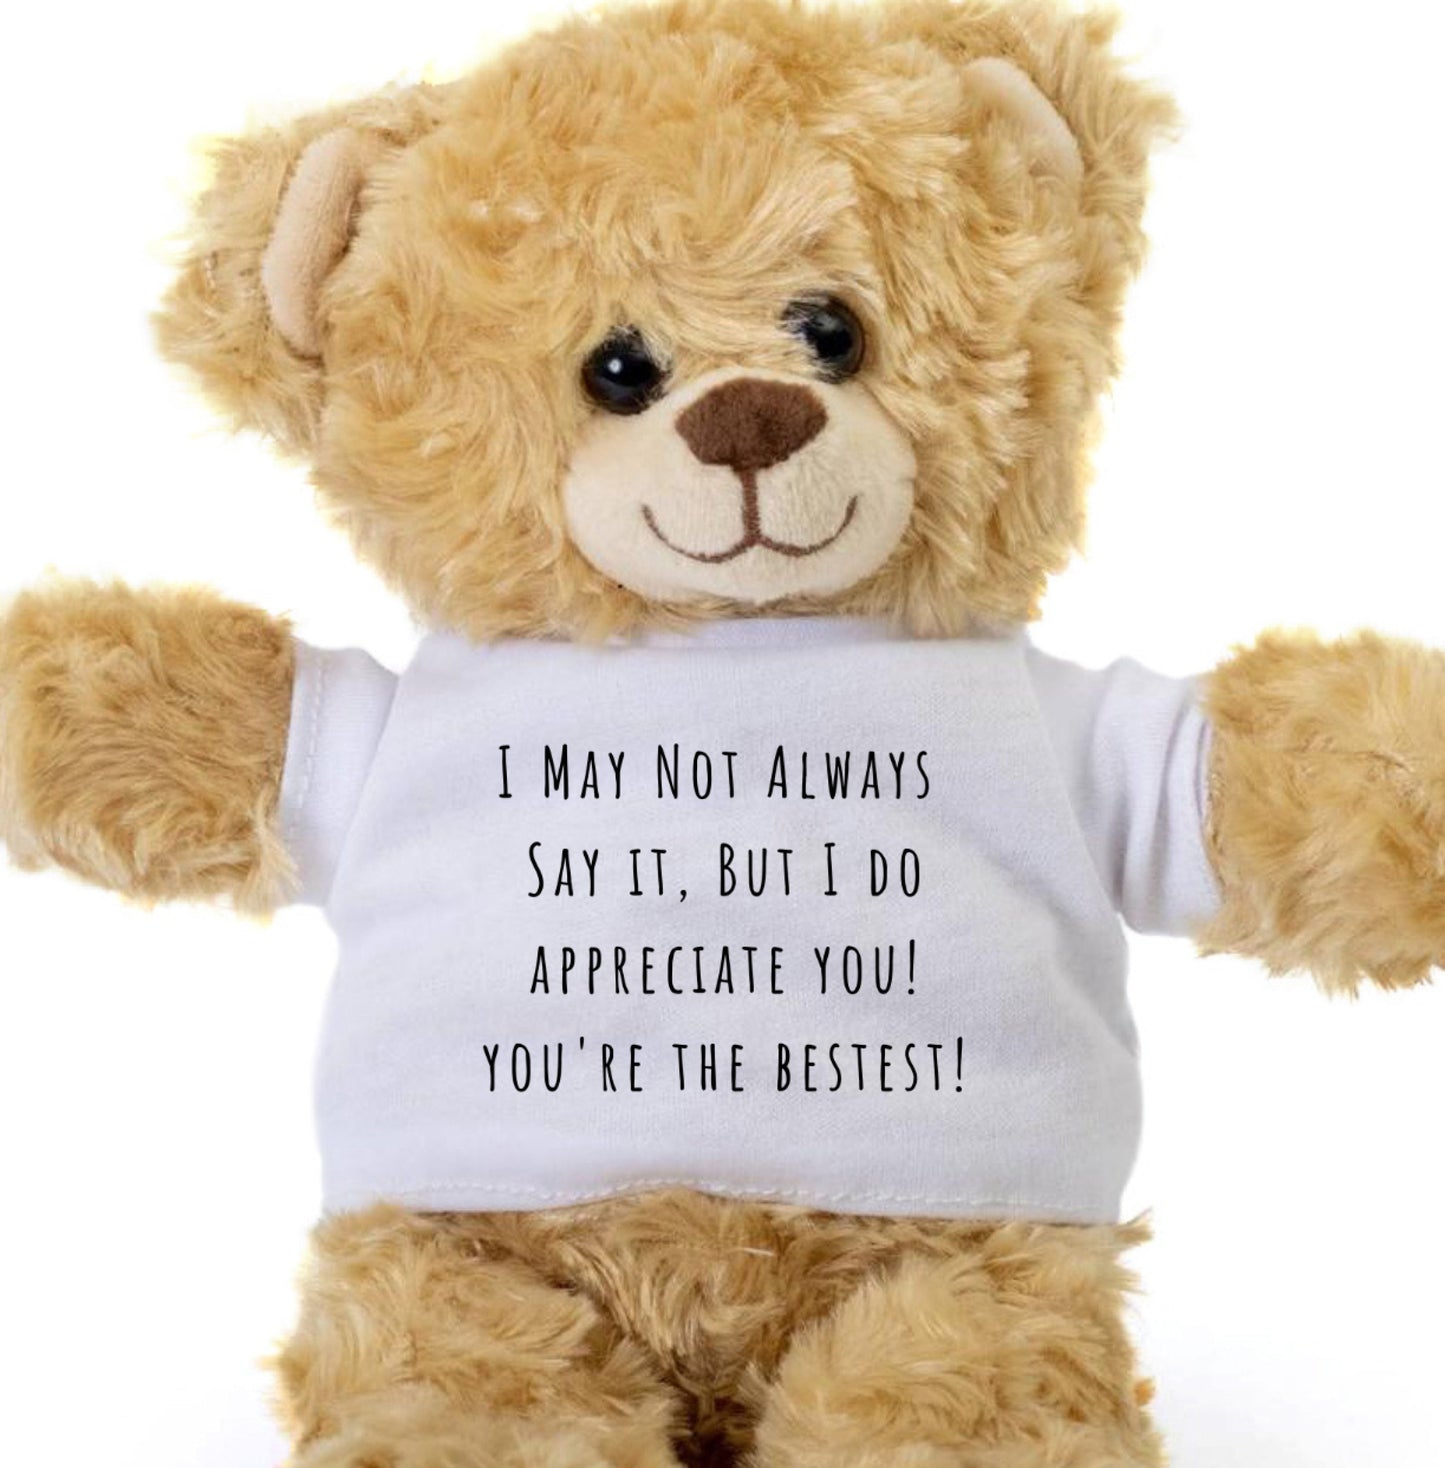 You're The Bestest Teddy Bear, Teddy Bear for Girlfriend, For Boyfriend, For Mom, Teddy Bear For Dad, Appreciation Gift, Gift for Caretaker